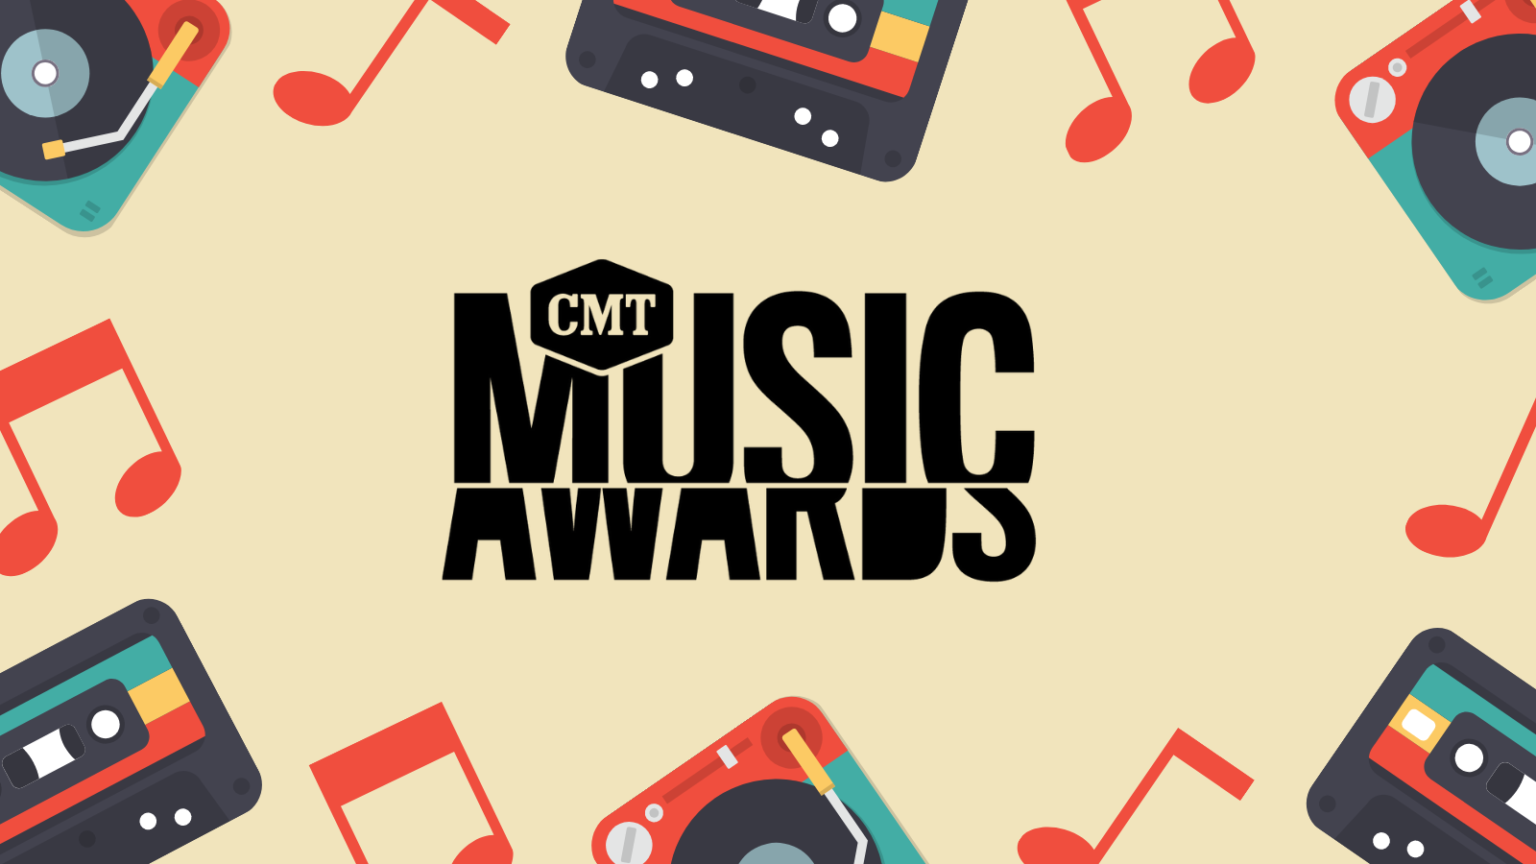 How to Watch CMT Music Awards 2019 Online Without Cable